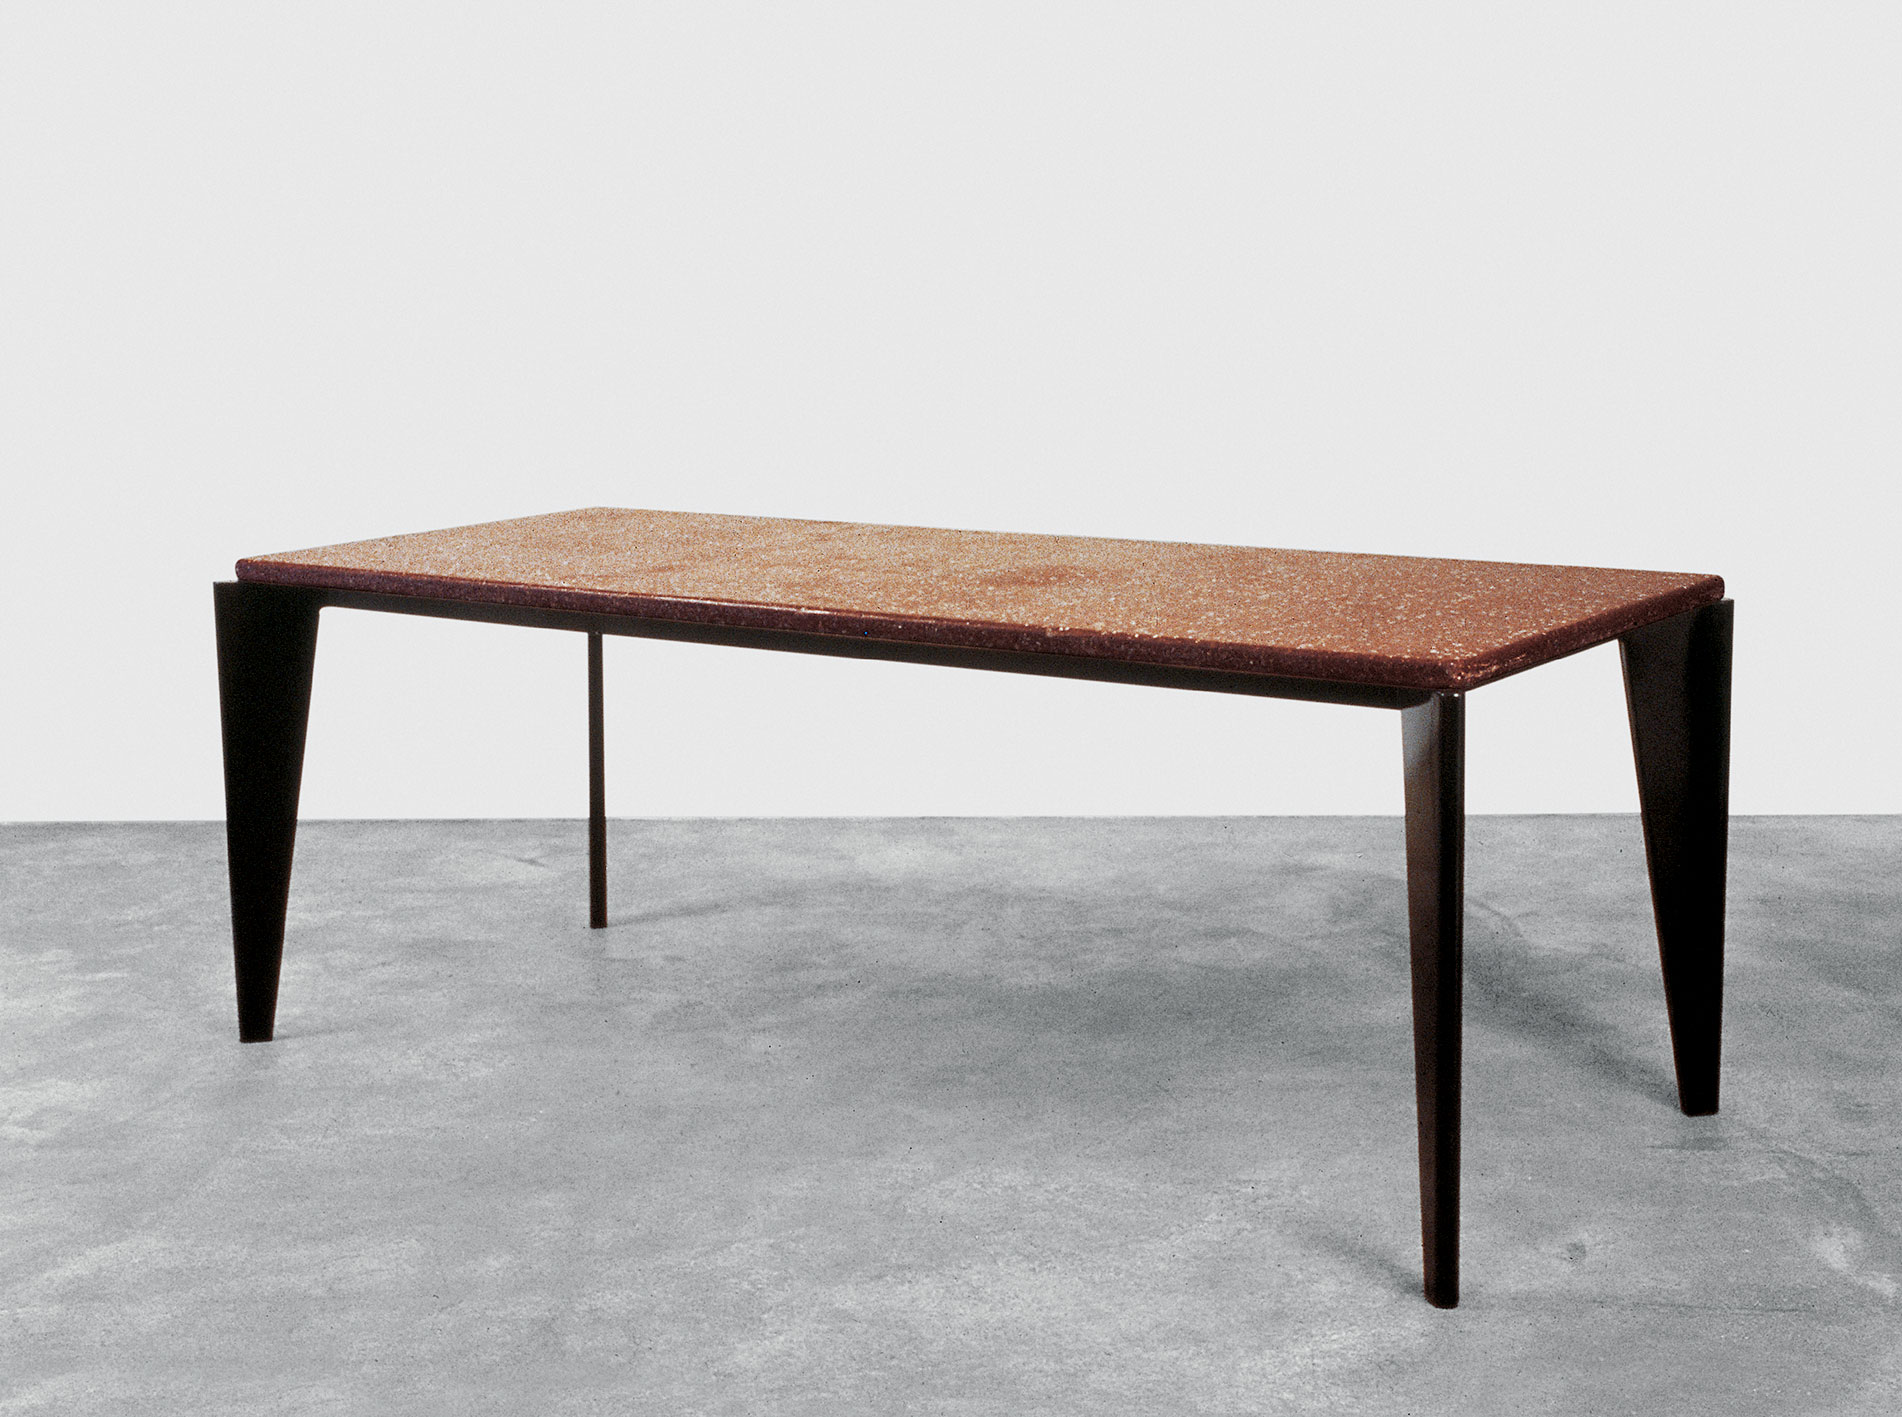 Flavigny table, model with red Granito table-top, ca. 1945.